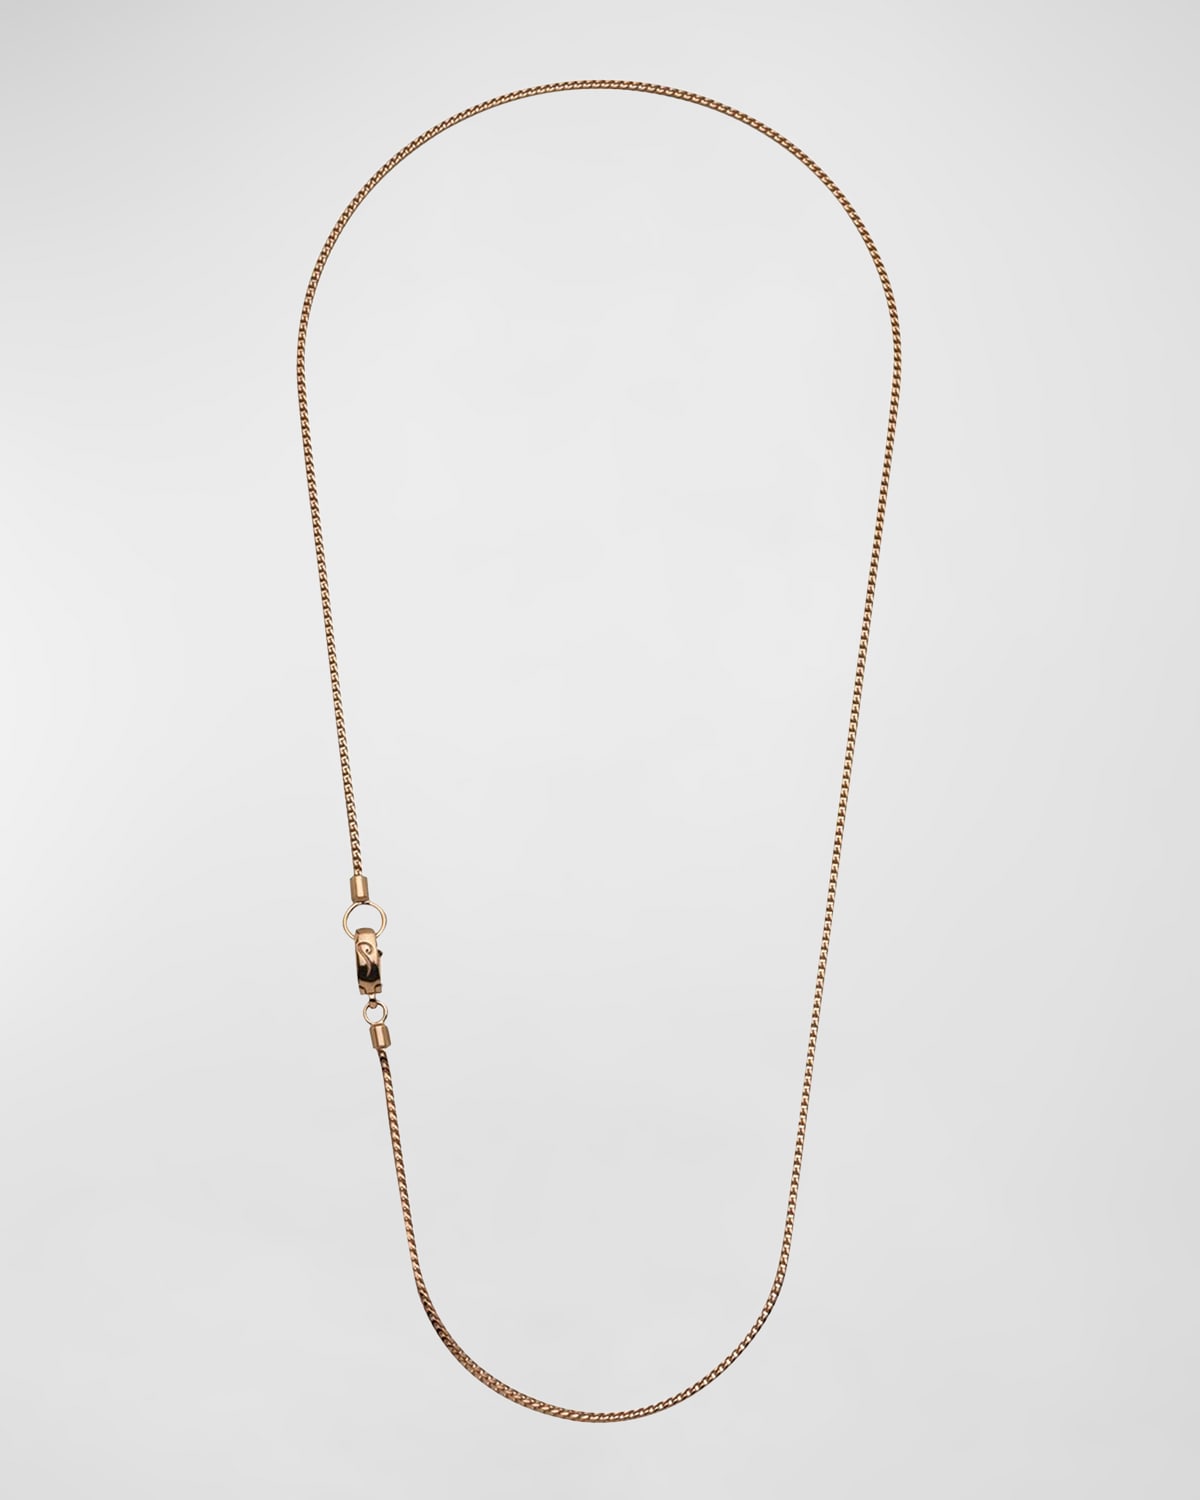 Marco Dal Maso Rose Gold Plated Silver Necklace With Polished Chain, 24"l